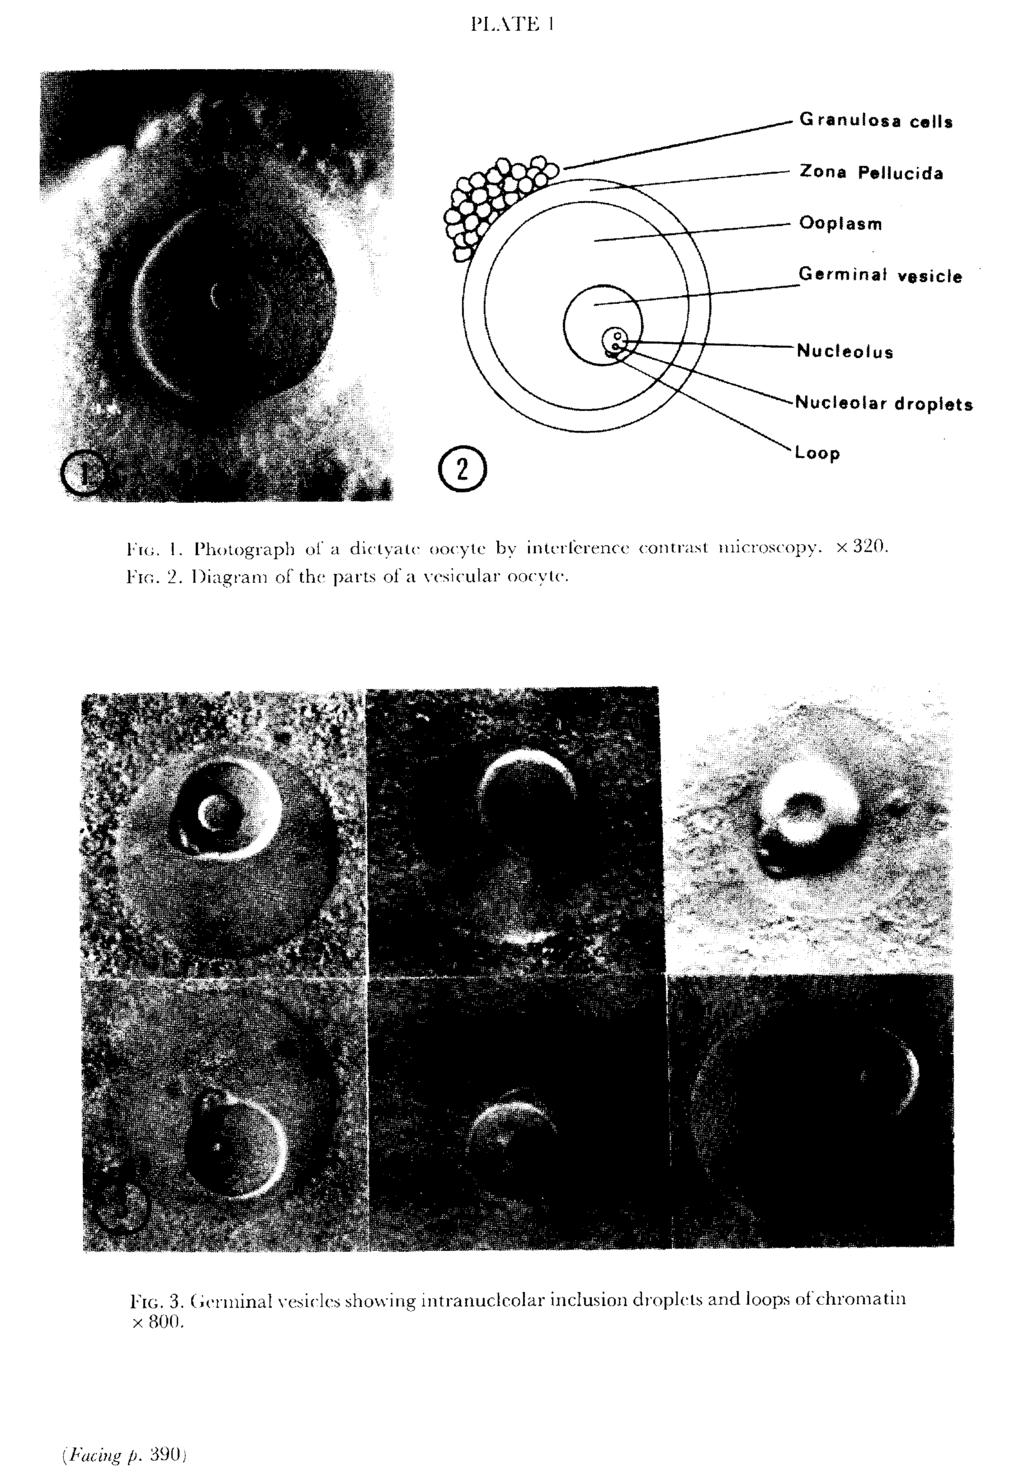 PLATE 1 of a dictyate oocyte by